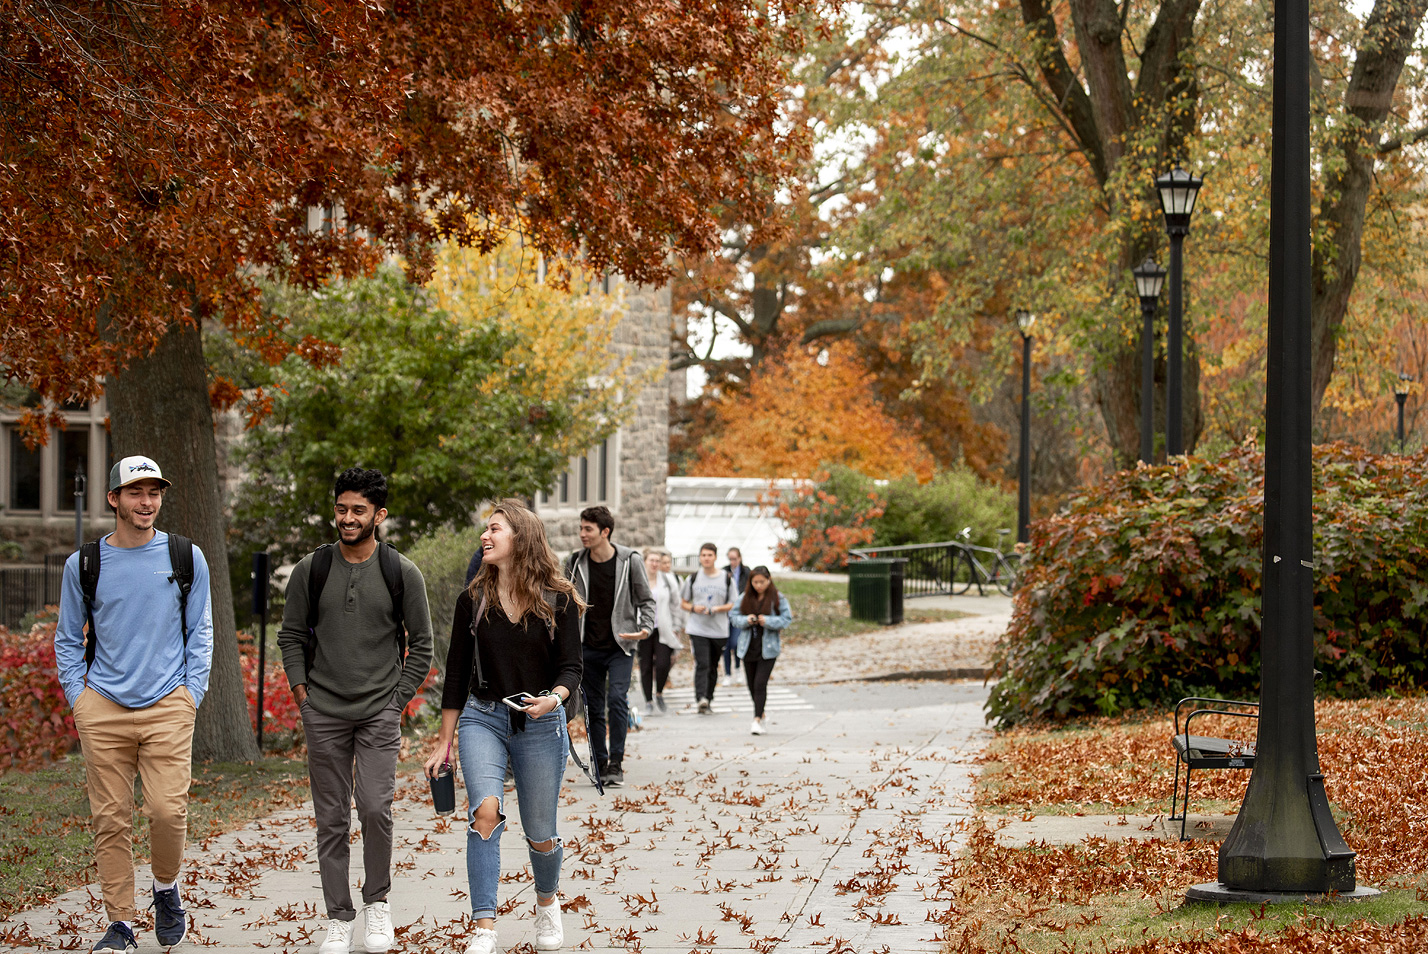 Students walking though campus in the fall